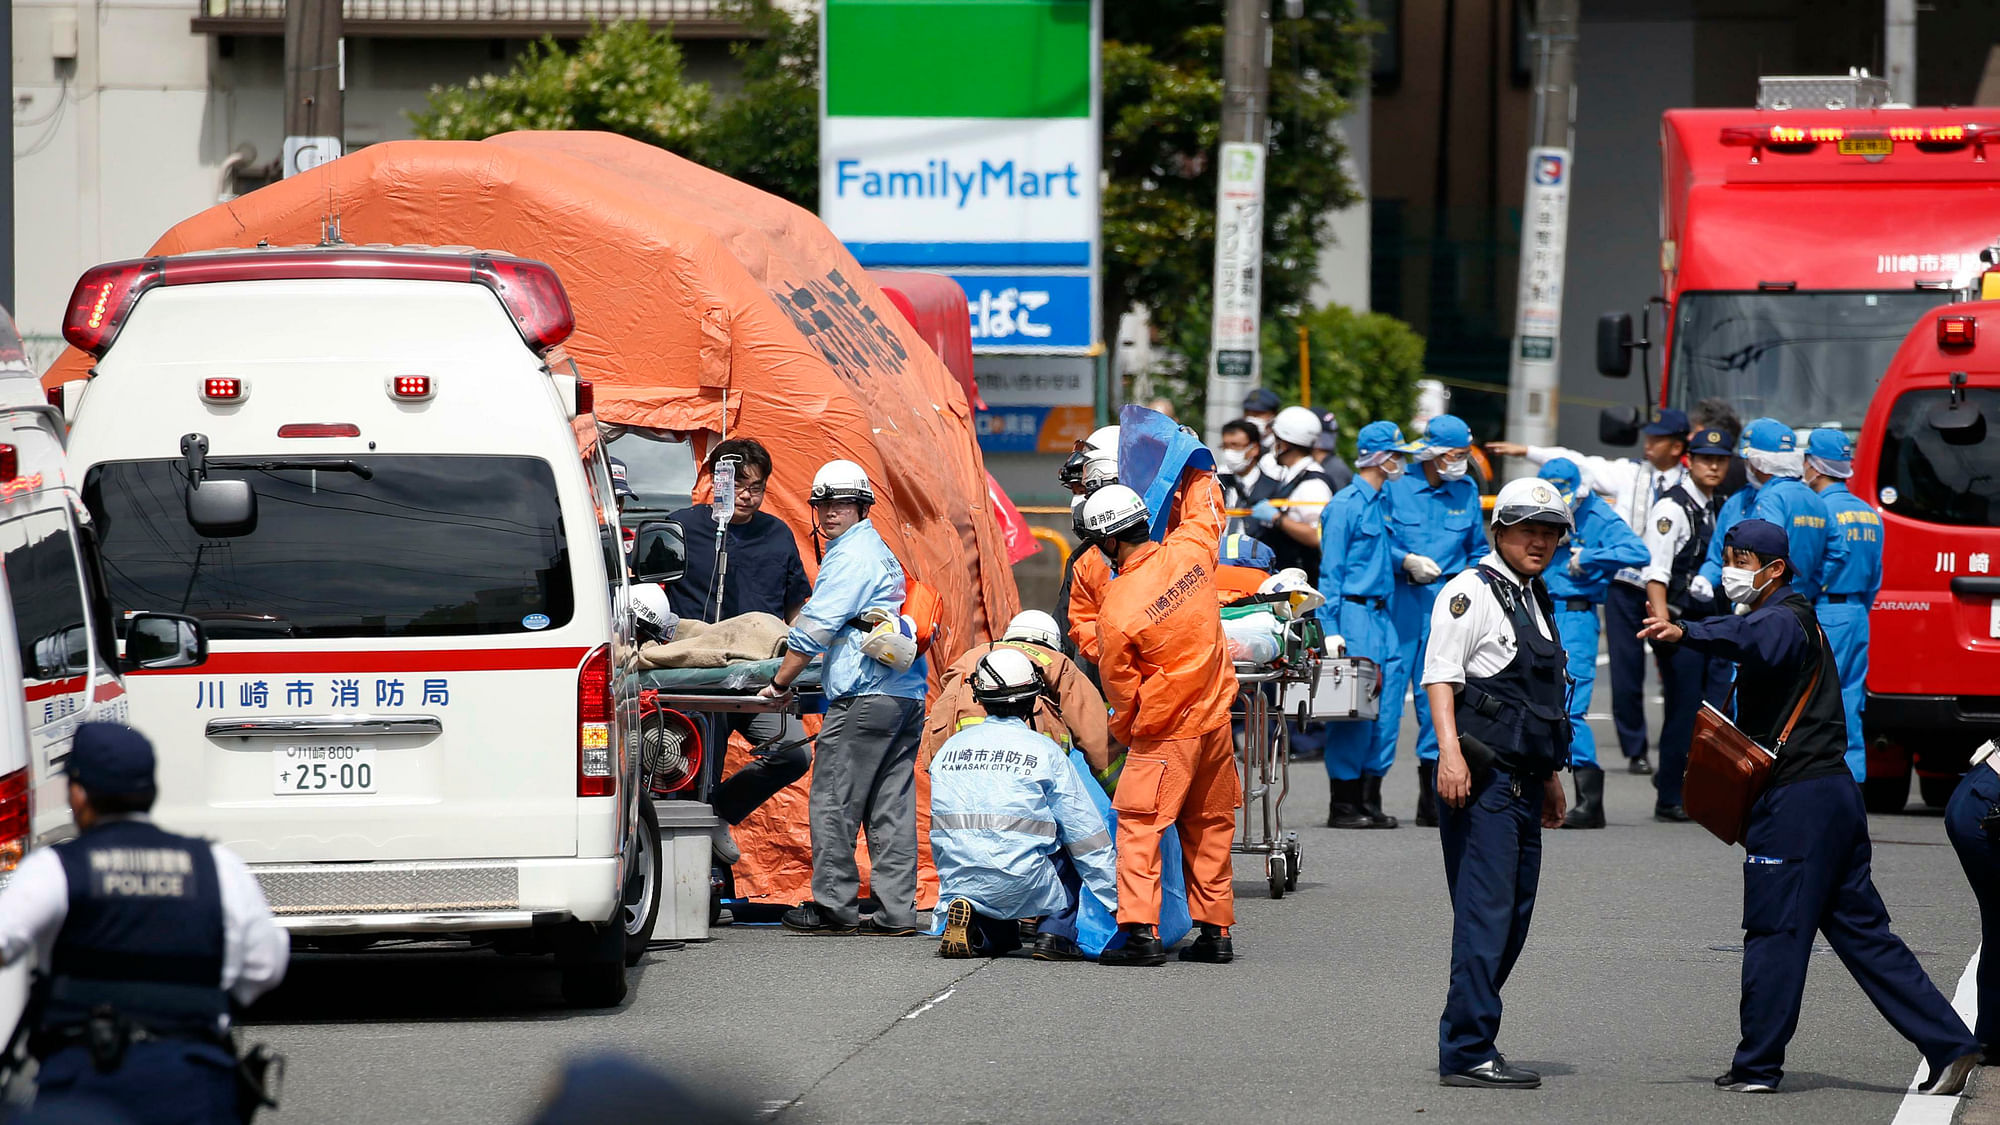 Rescuers work at the scene of an attack in Kawasaki, near Tokyo on 28 May 2019.&nbsp;